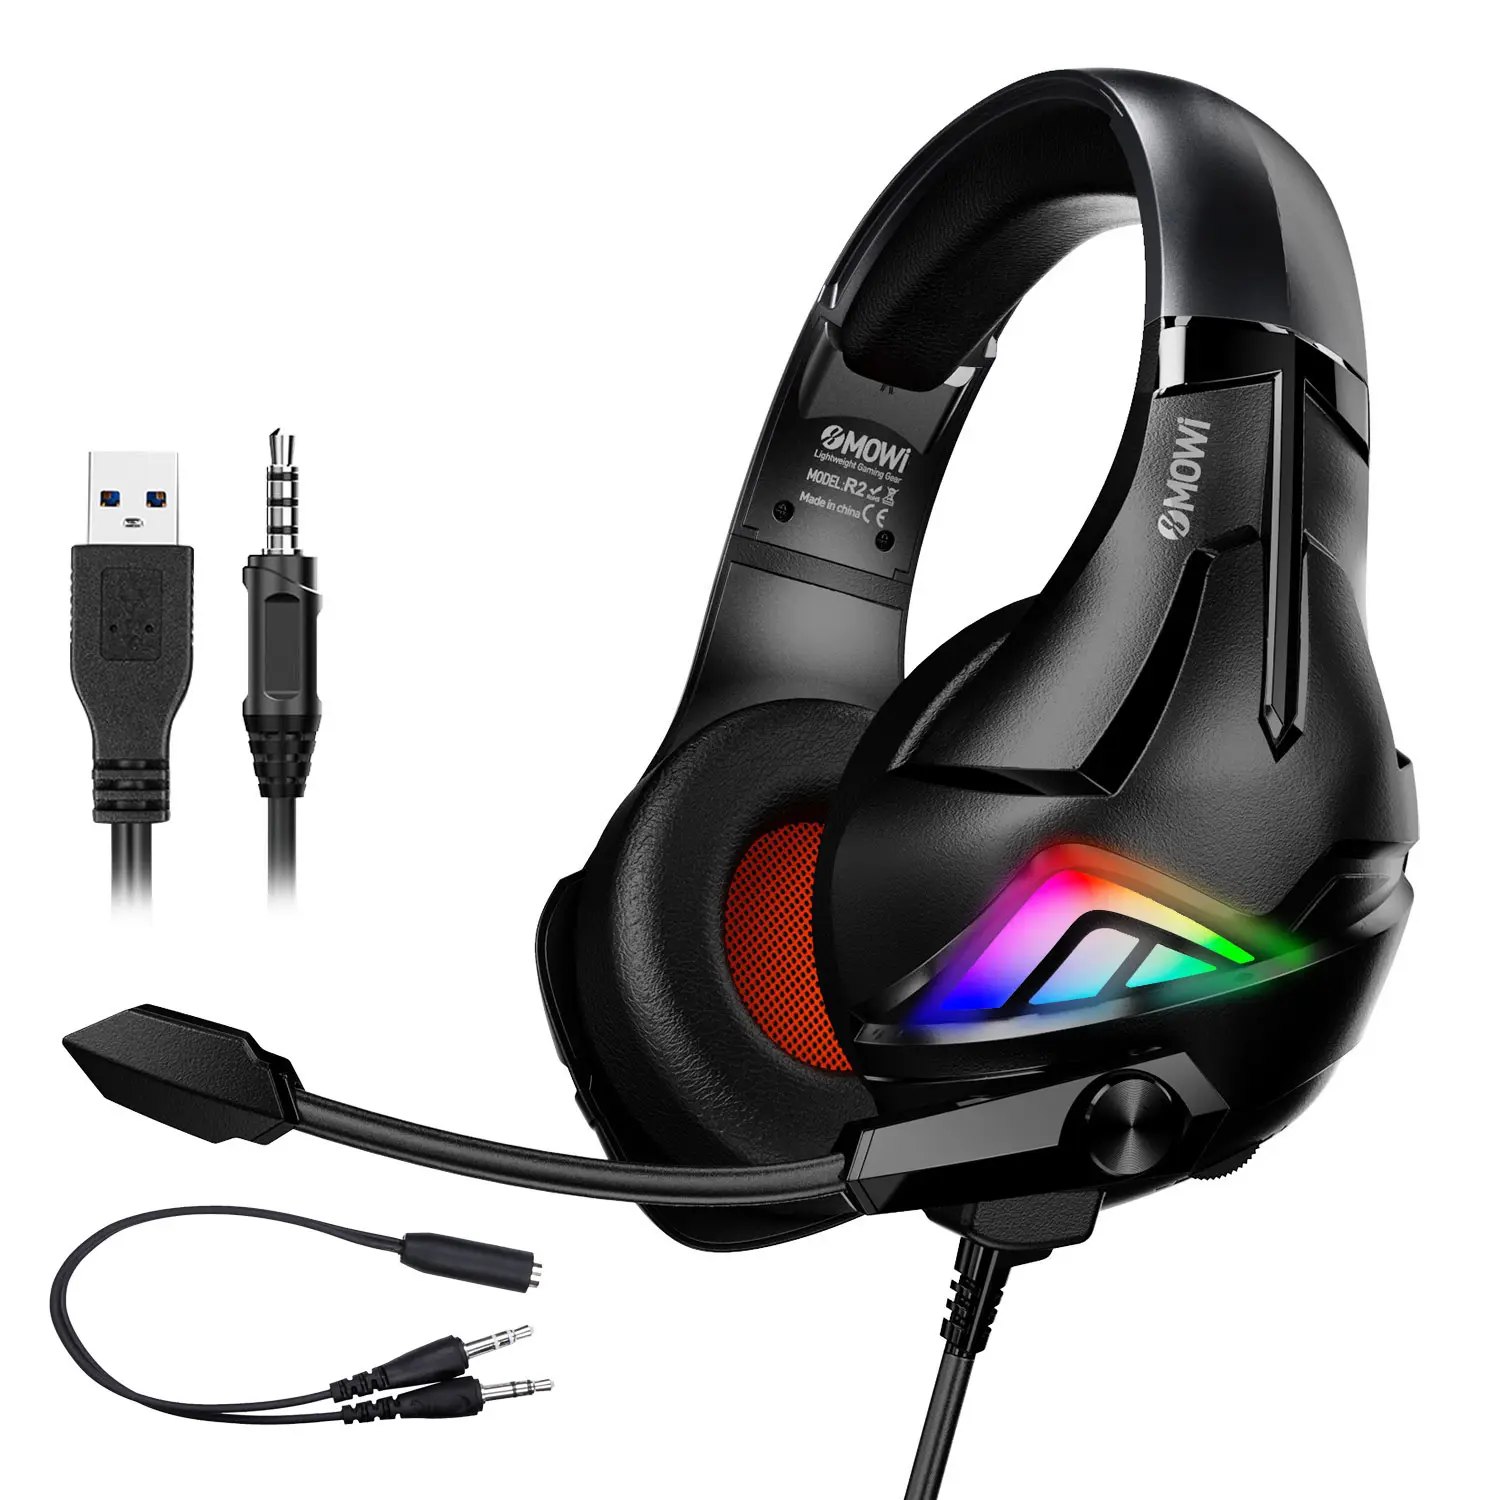 Hot Xmowi R2 Stereo 3.5Mm Noise Cancelling Headset Spel Met Microfoon Led Licht Voor Schakelaar PS4 Xbox One Pc gaming Headsets